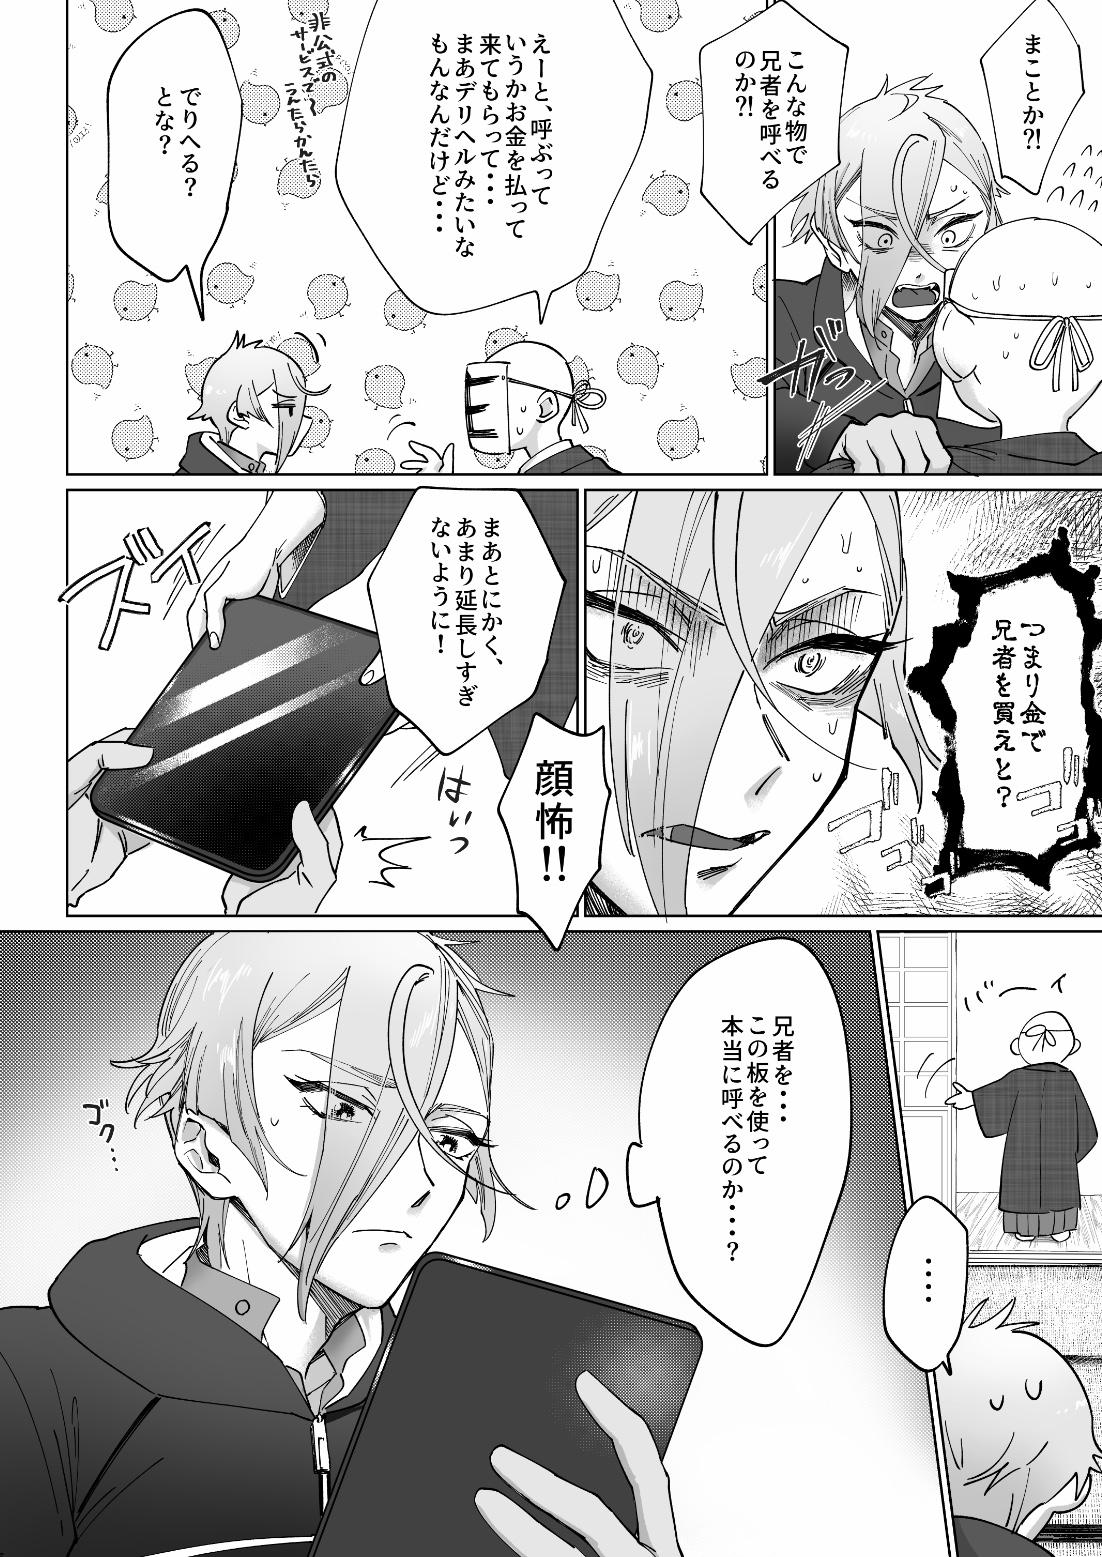 Leather デリバリー兄者 - Touken ranbu And - Page 5